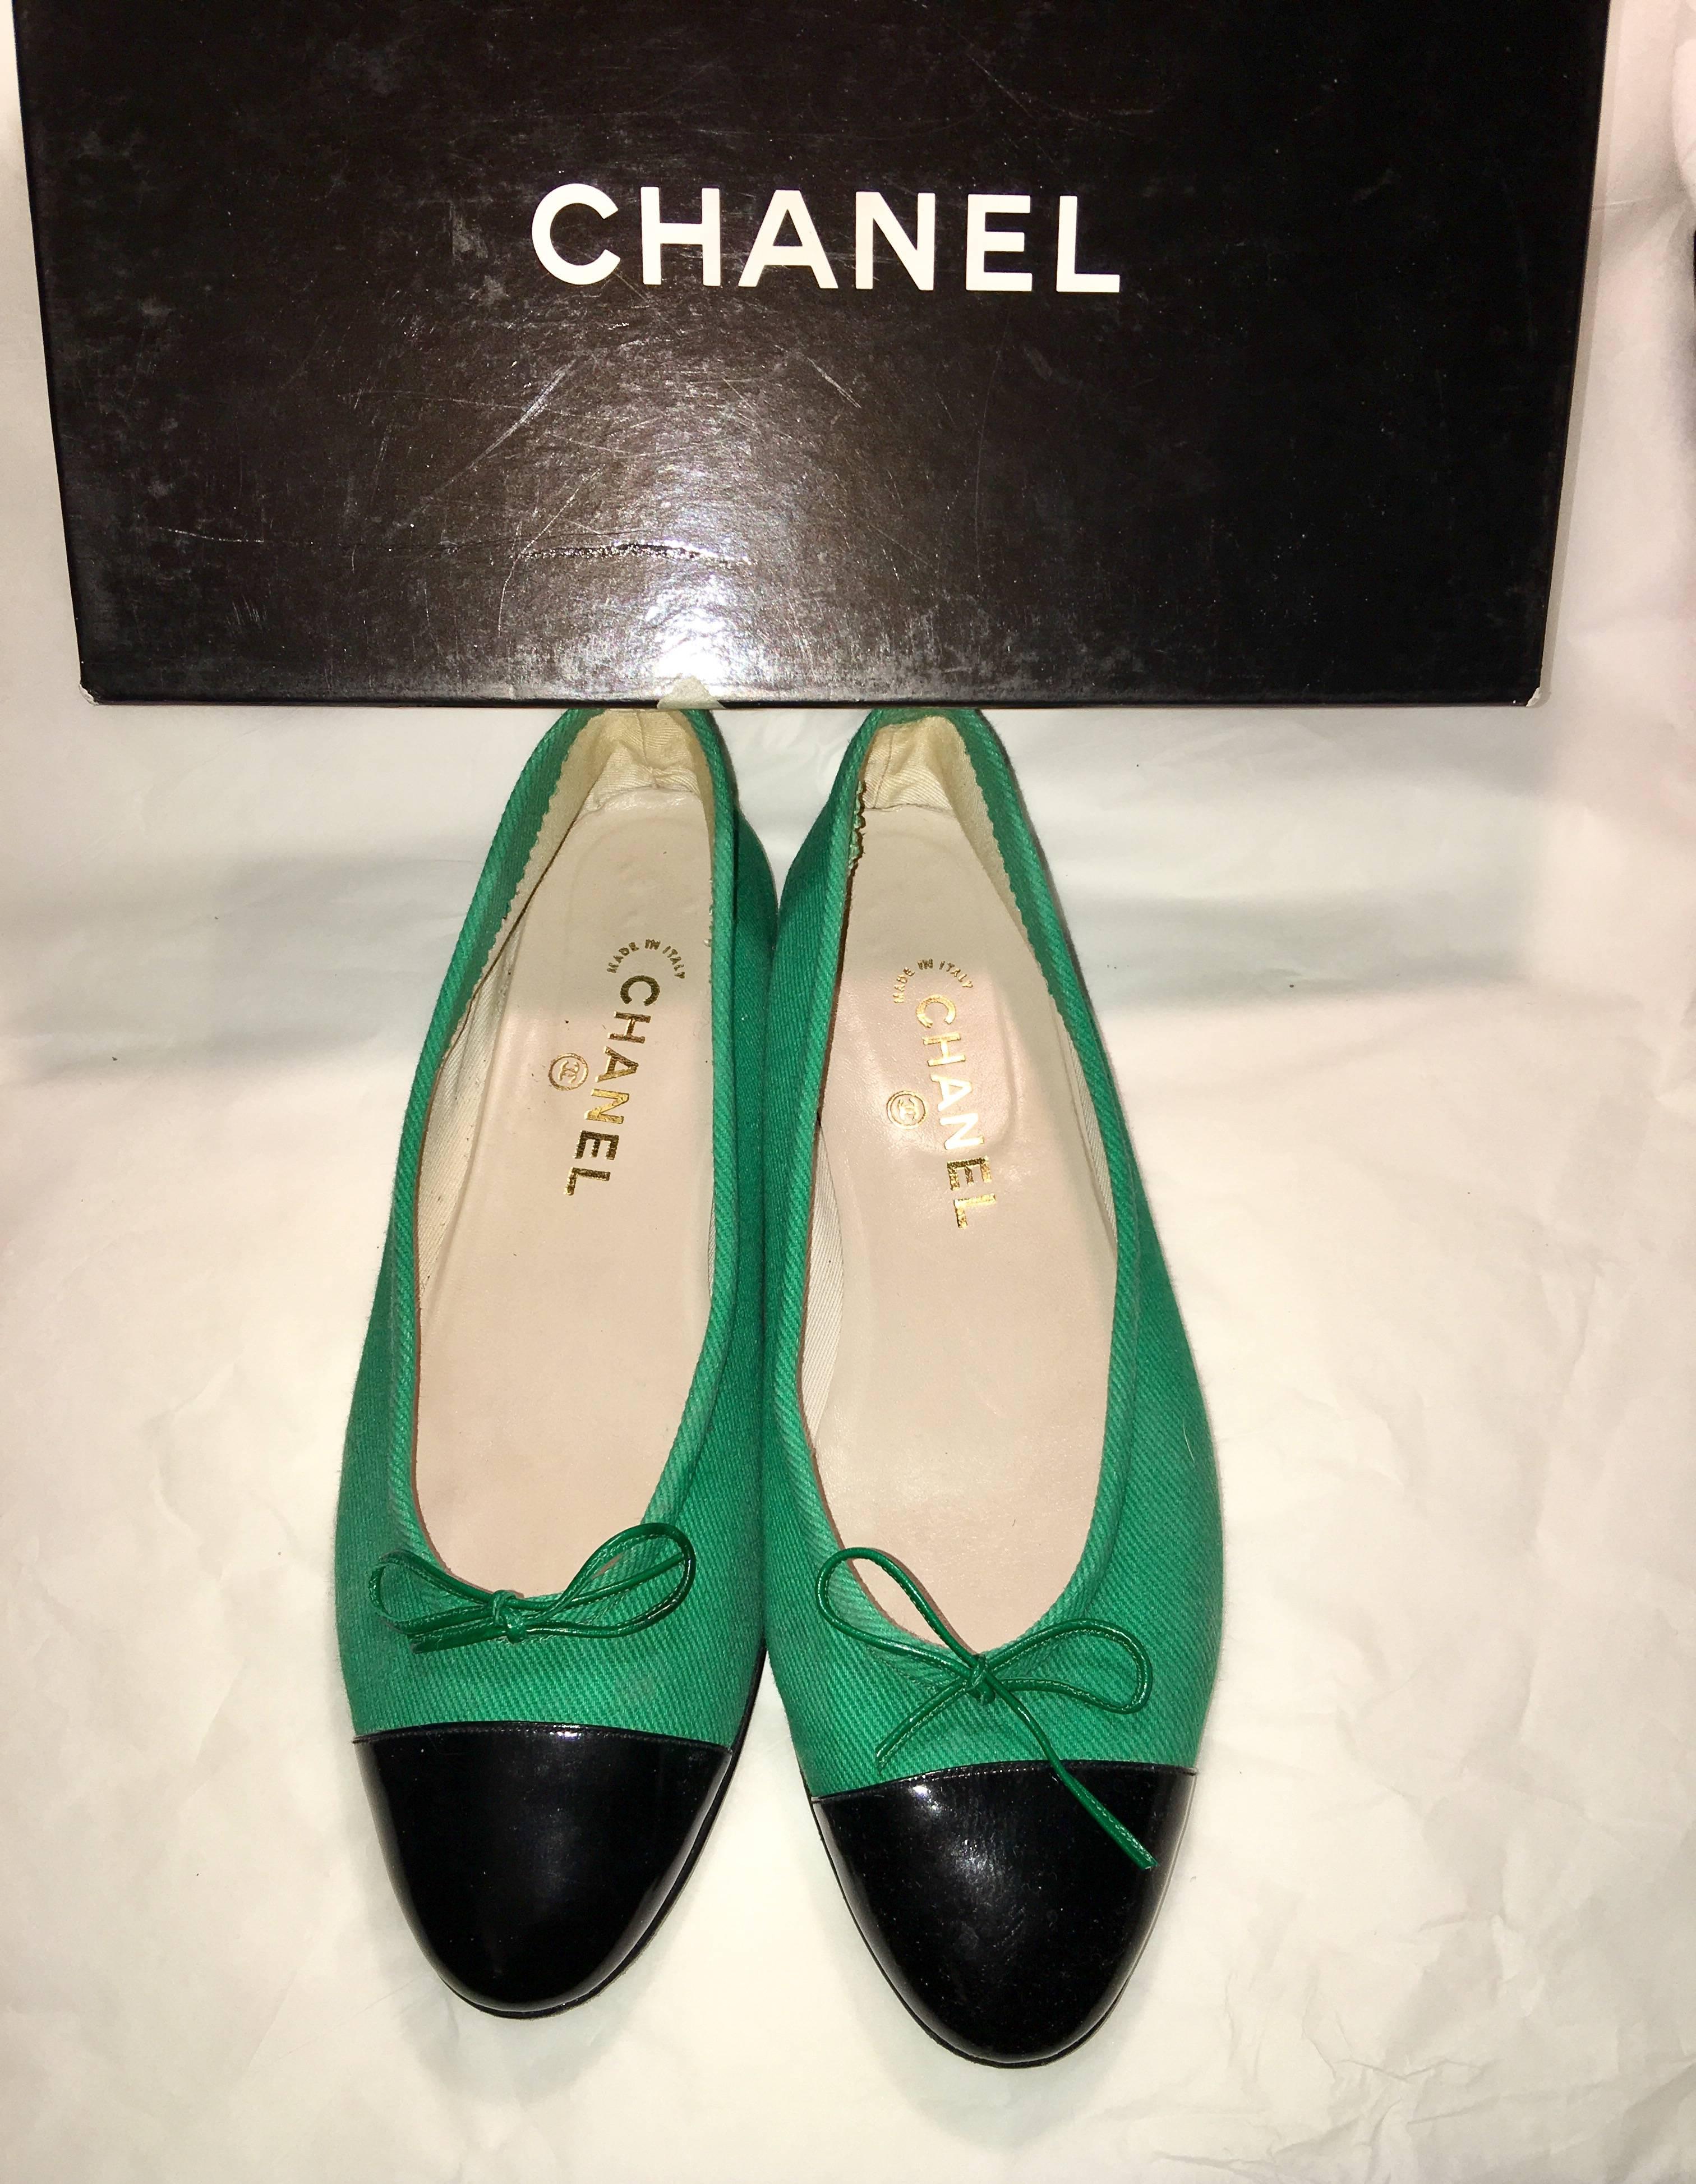 Gently worn in excellent condition canvas with cap toe . Green with black leather. Size 40. Shipped in Chanel Box
